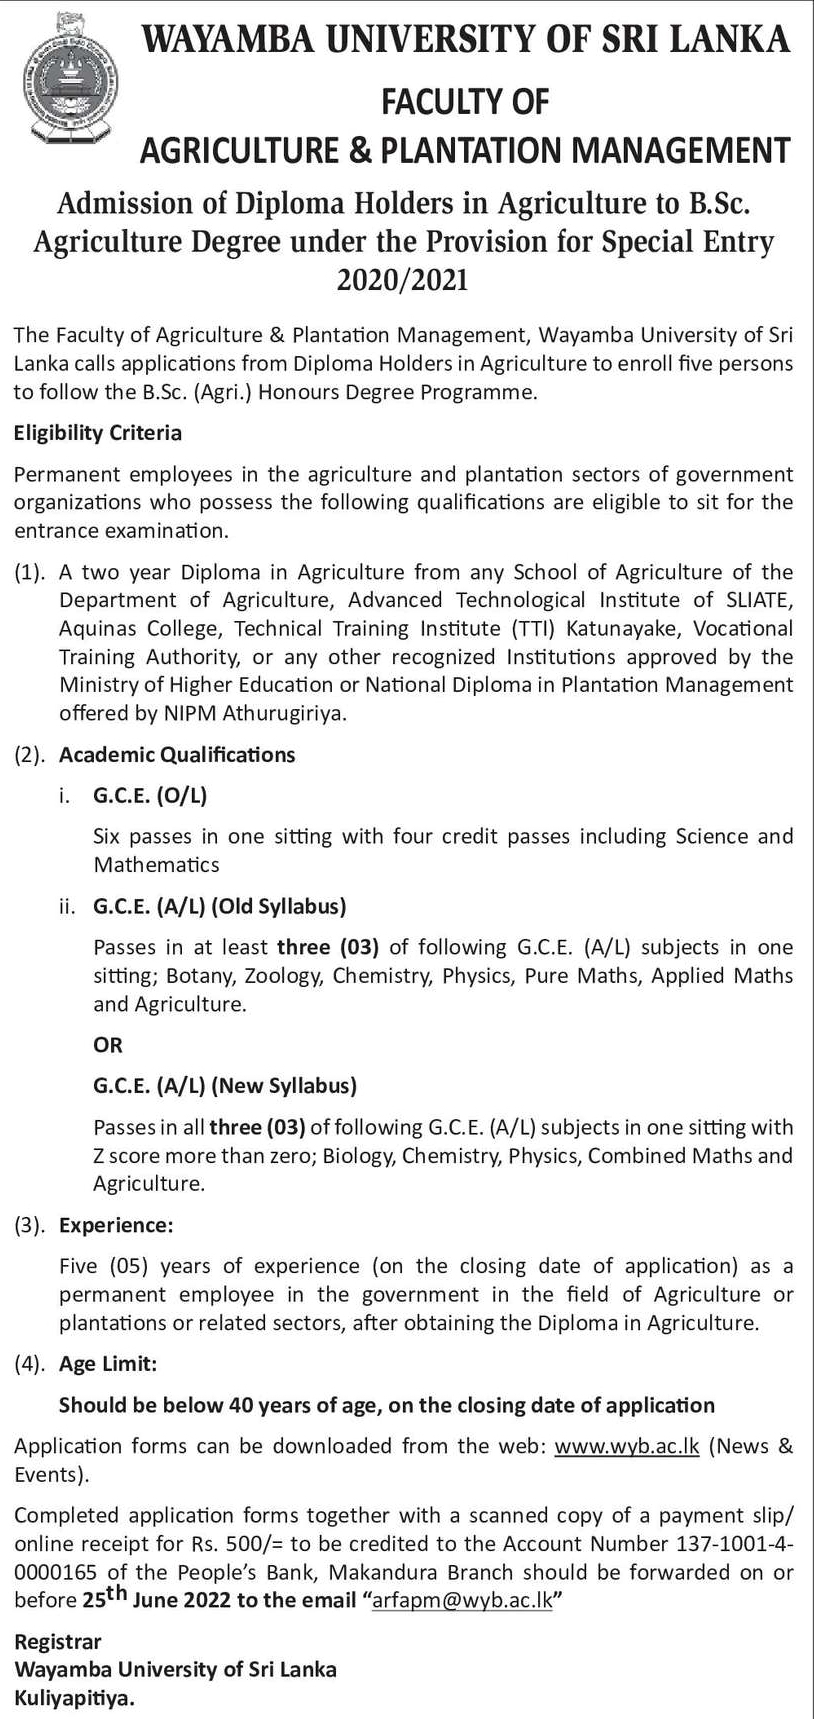 Admission of Diploma Holders in Agriculture to B.Sc. Agriculture Degree under the Provision for Special Entry 2020/2021